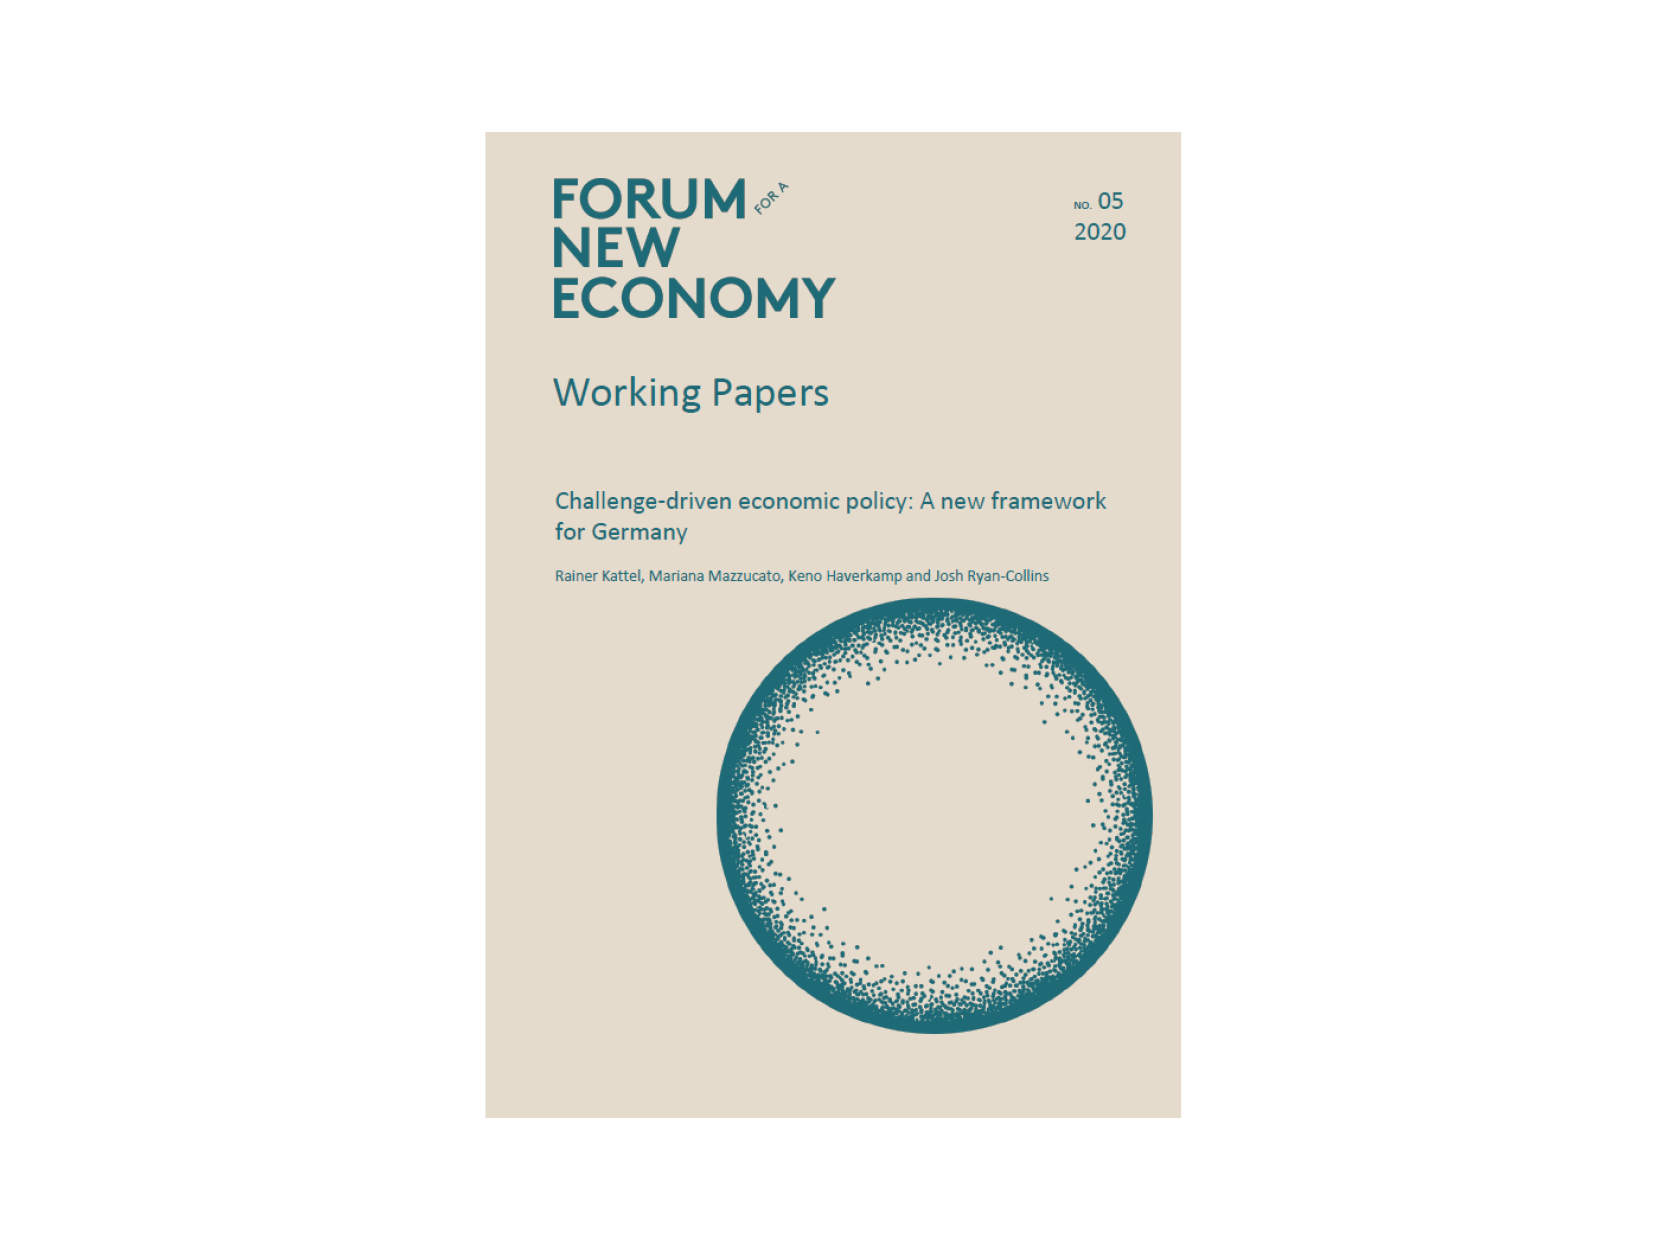 Challenge-driven economic policy: A new framework for Germany